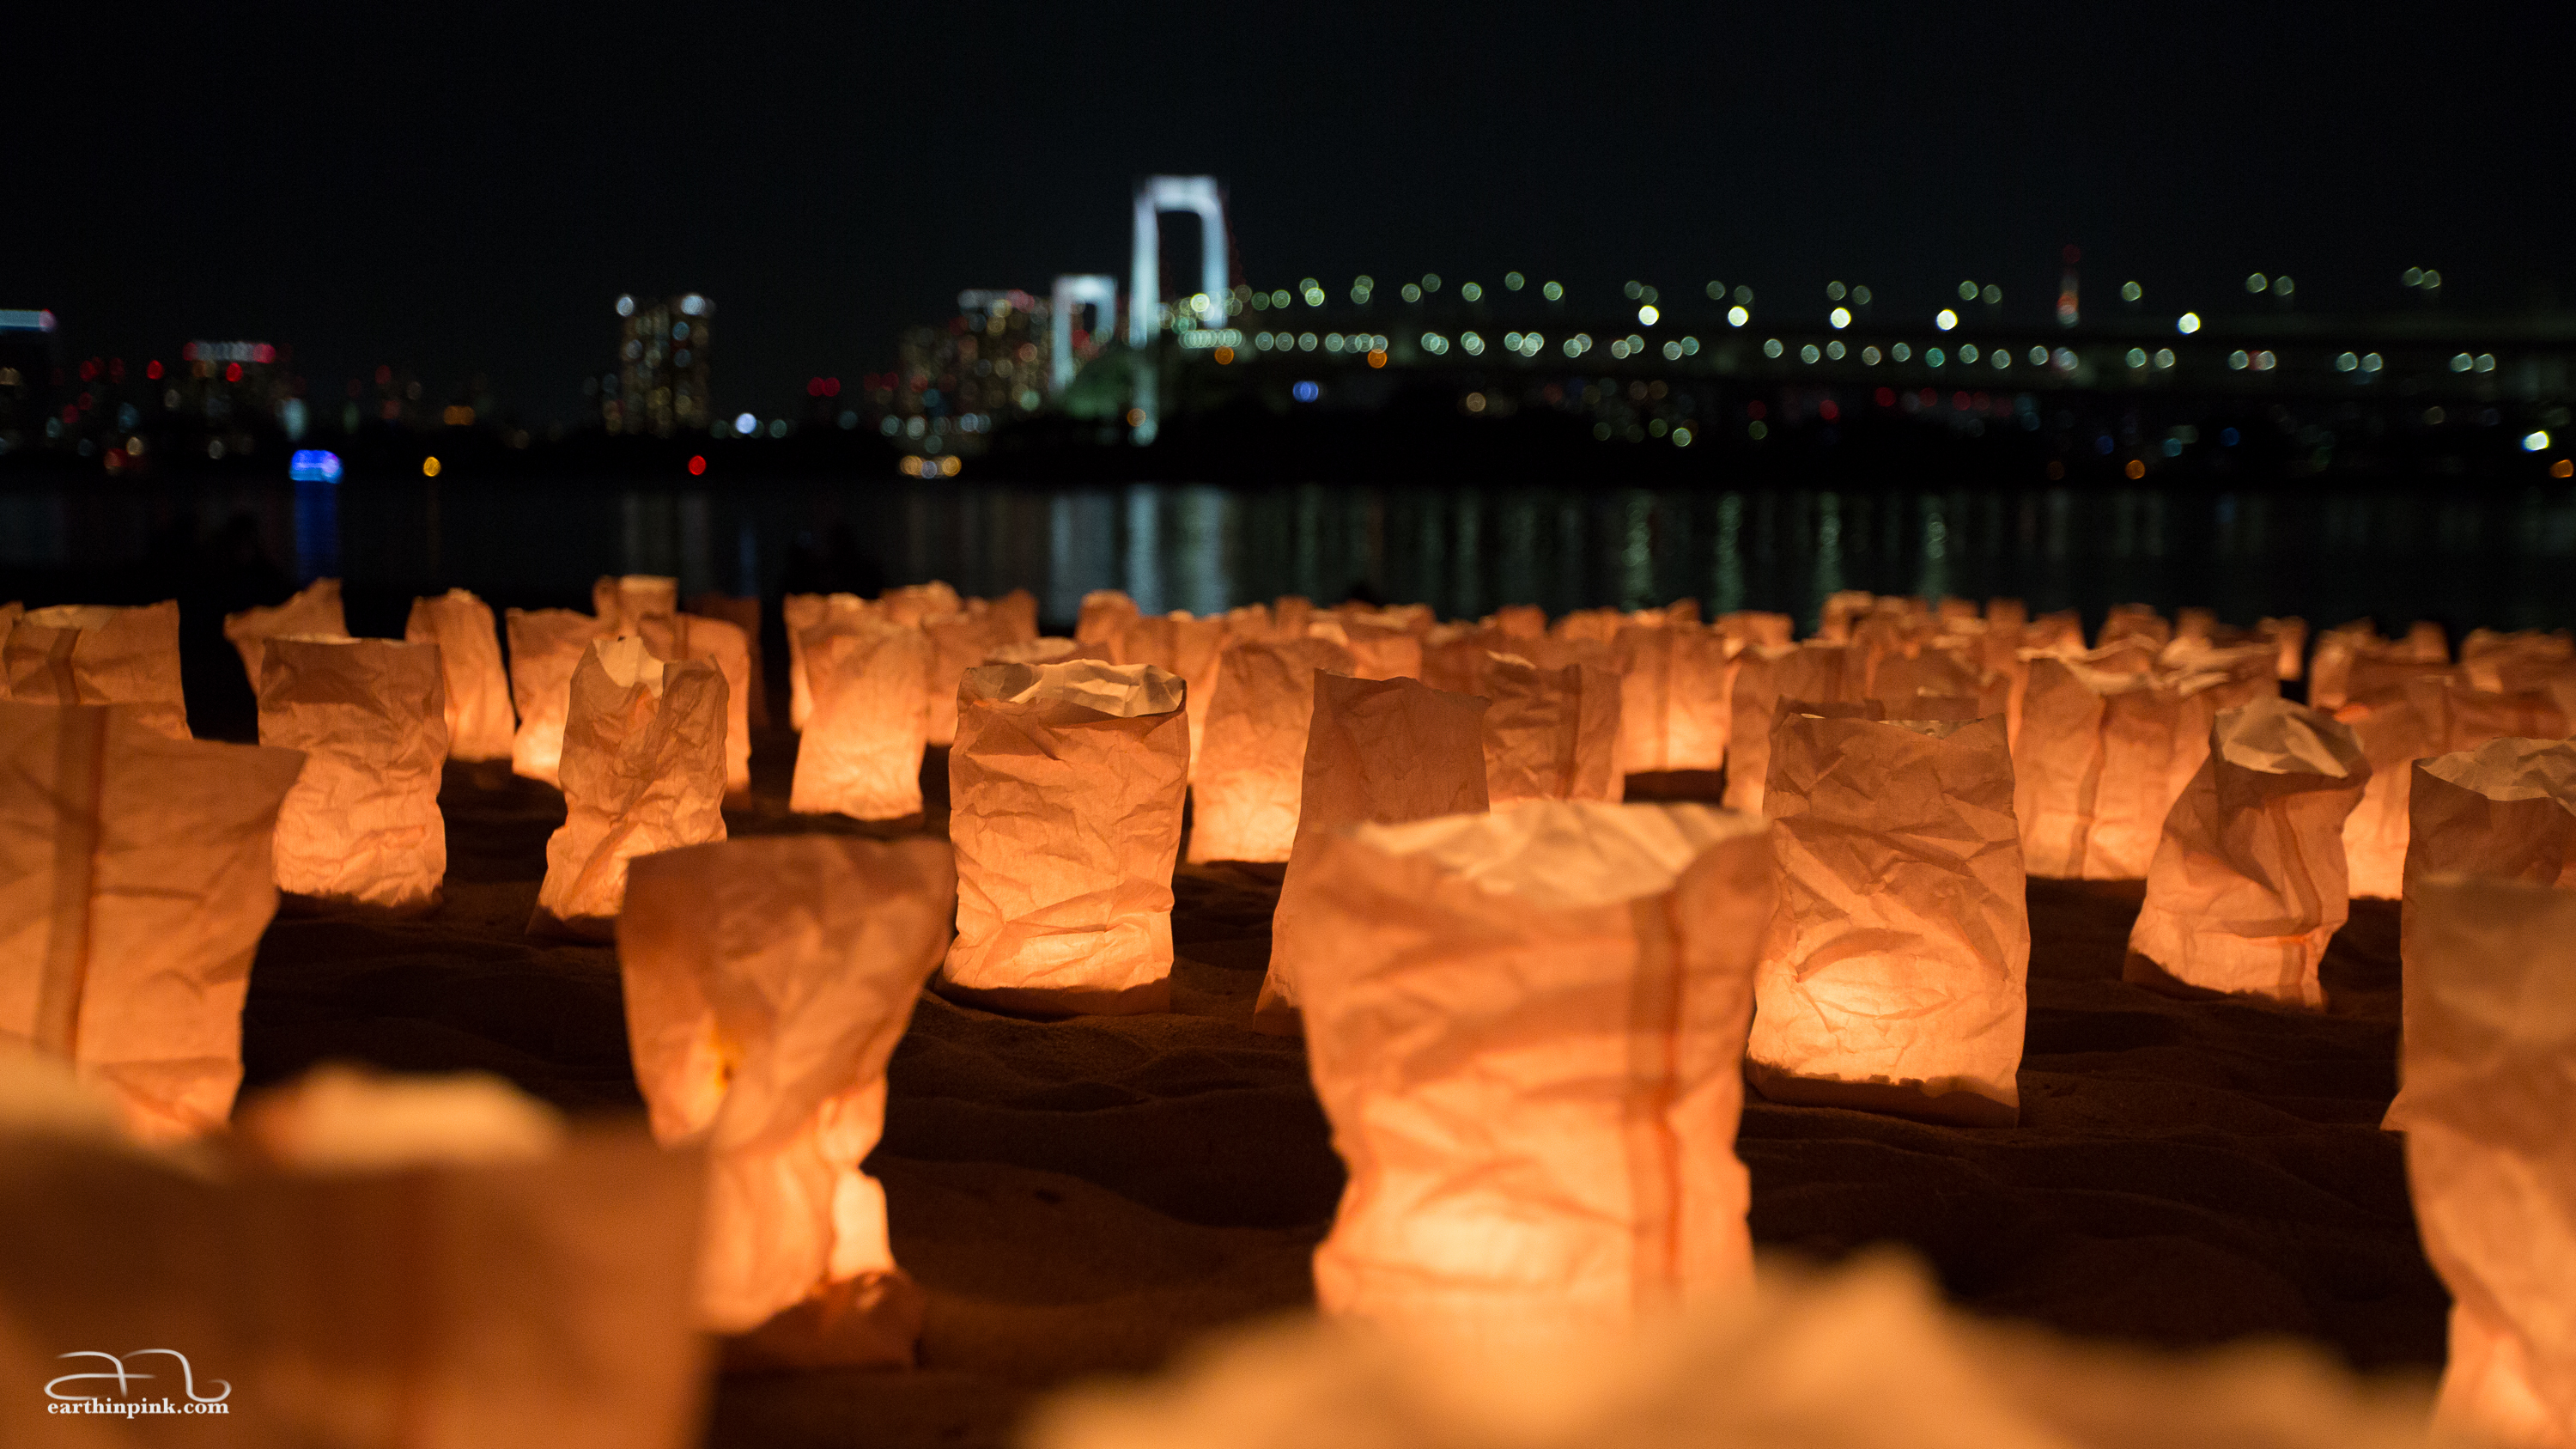 A focus on the paper bags used as lampions on the beach, with Odaiba's rainbow bridge in the distance.